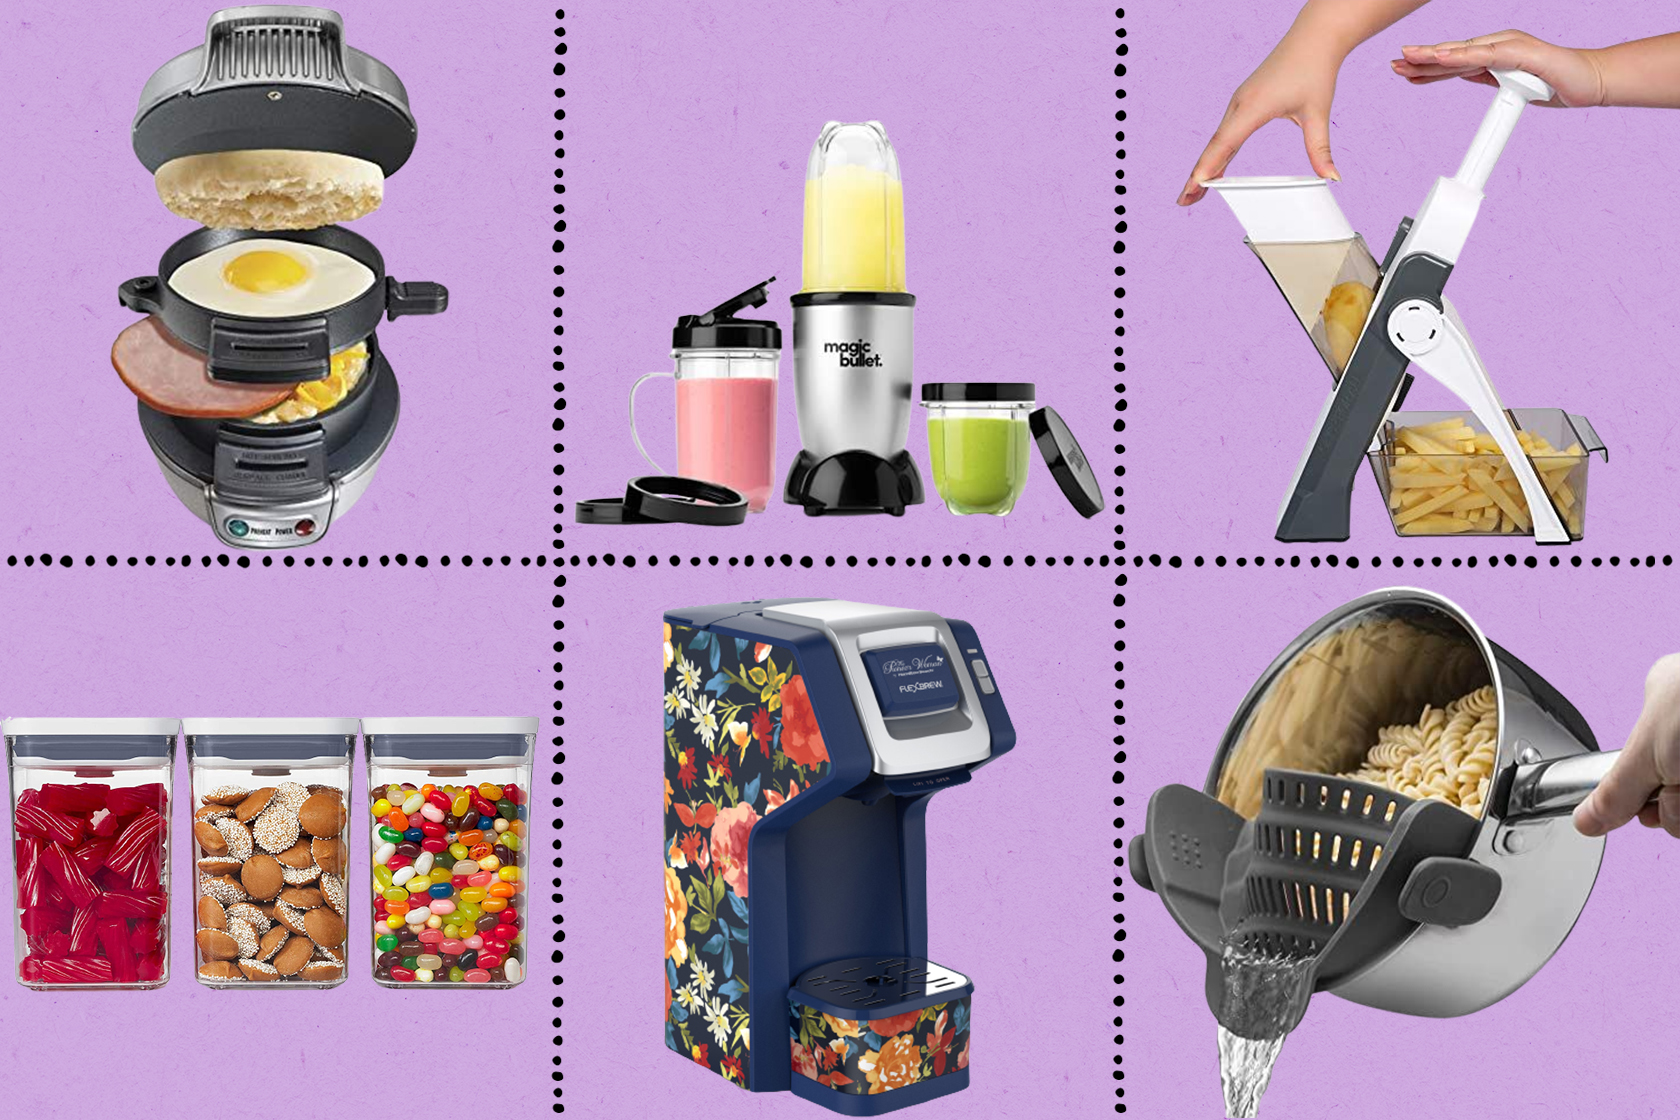 16 kitchen tools under $50 you’ll actually use